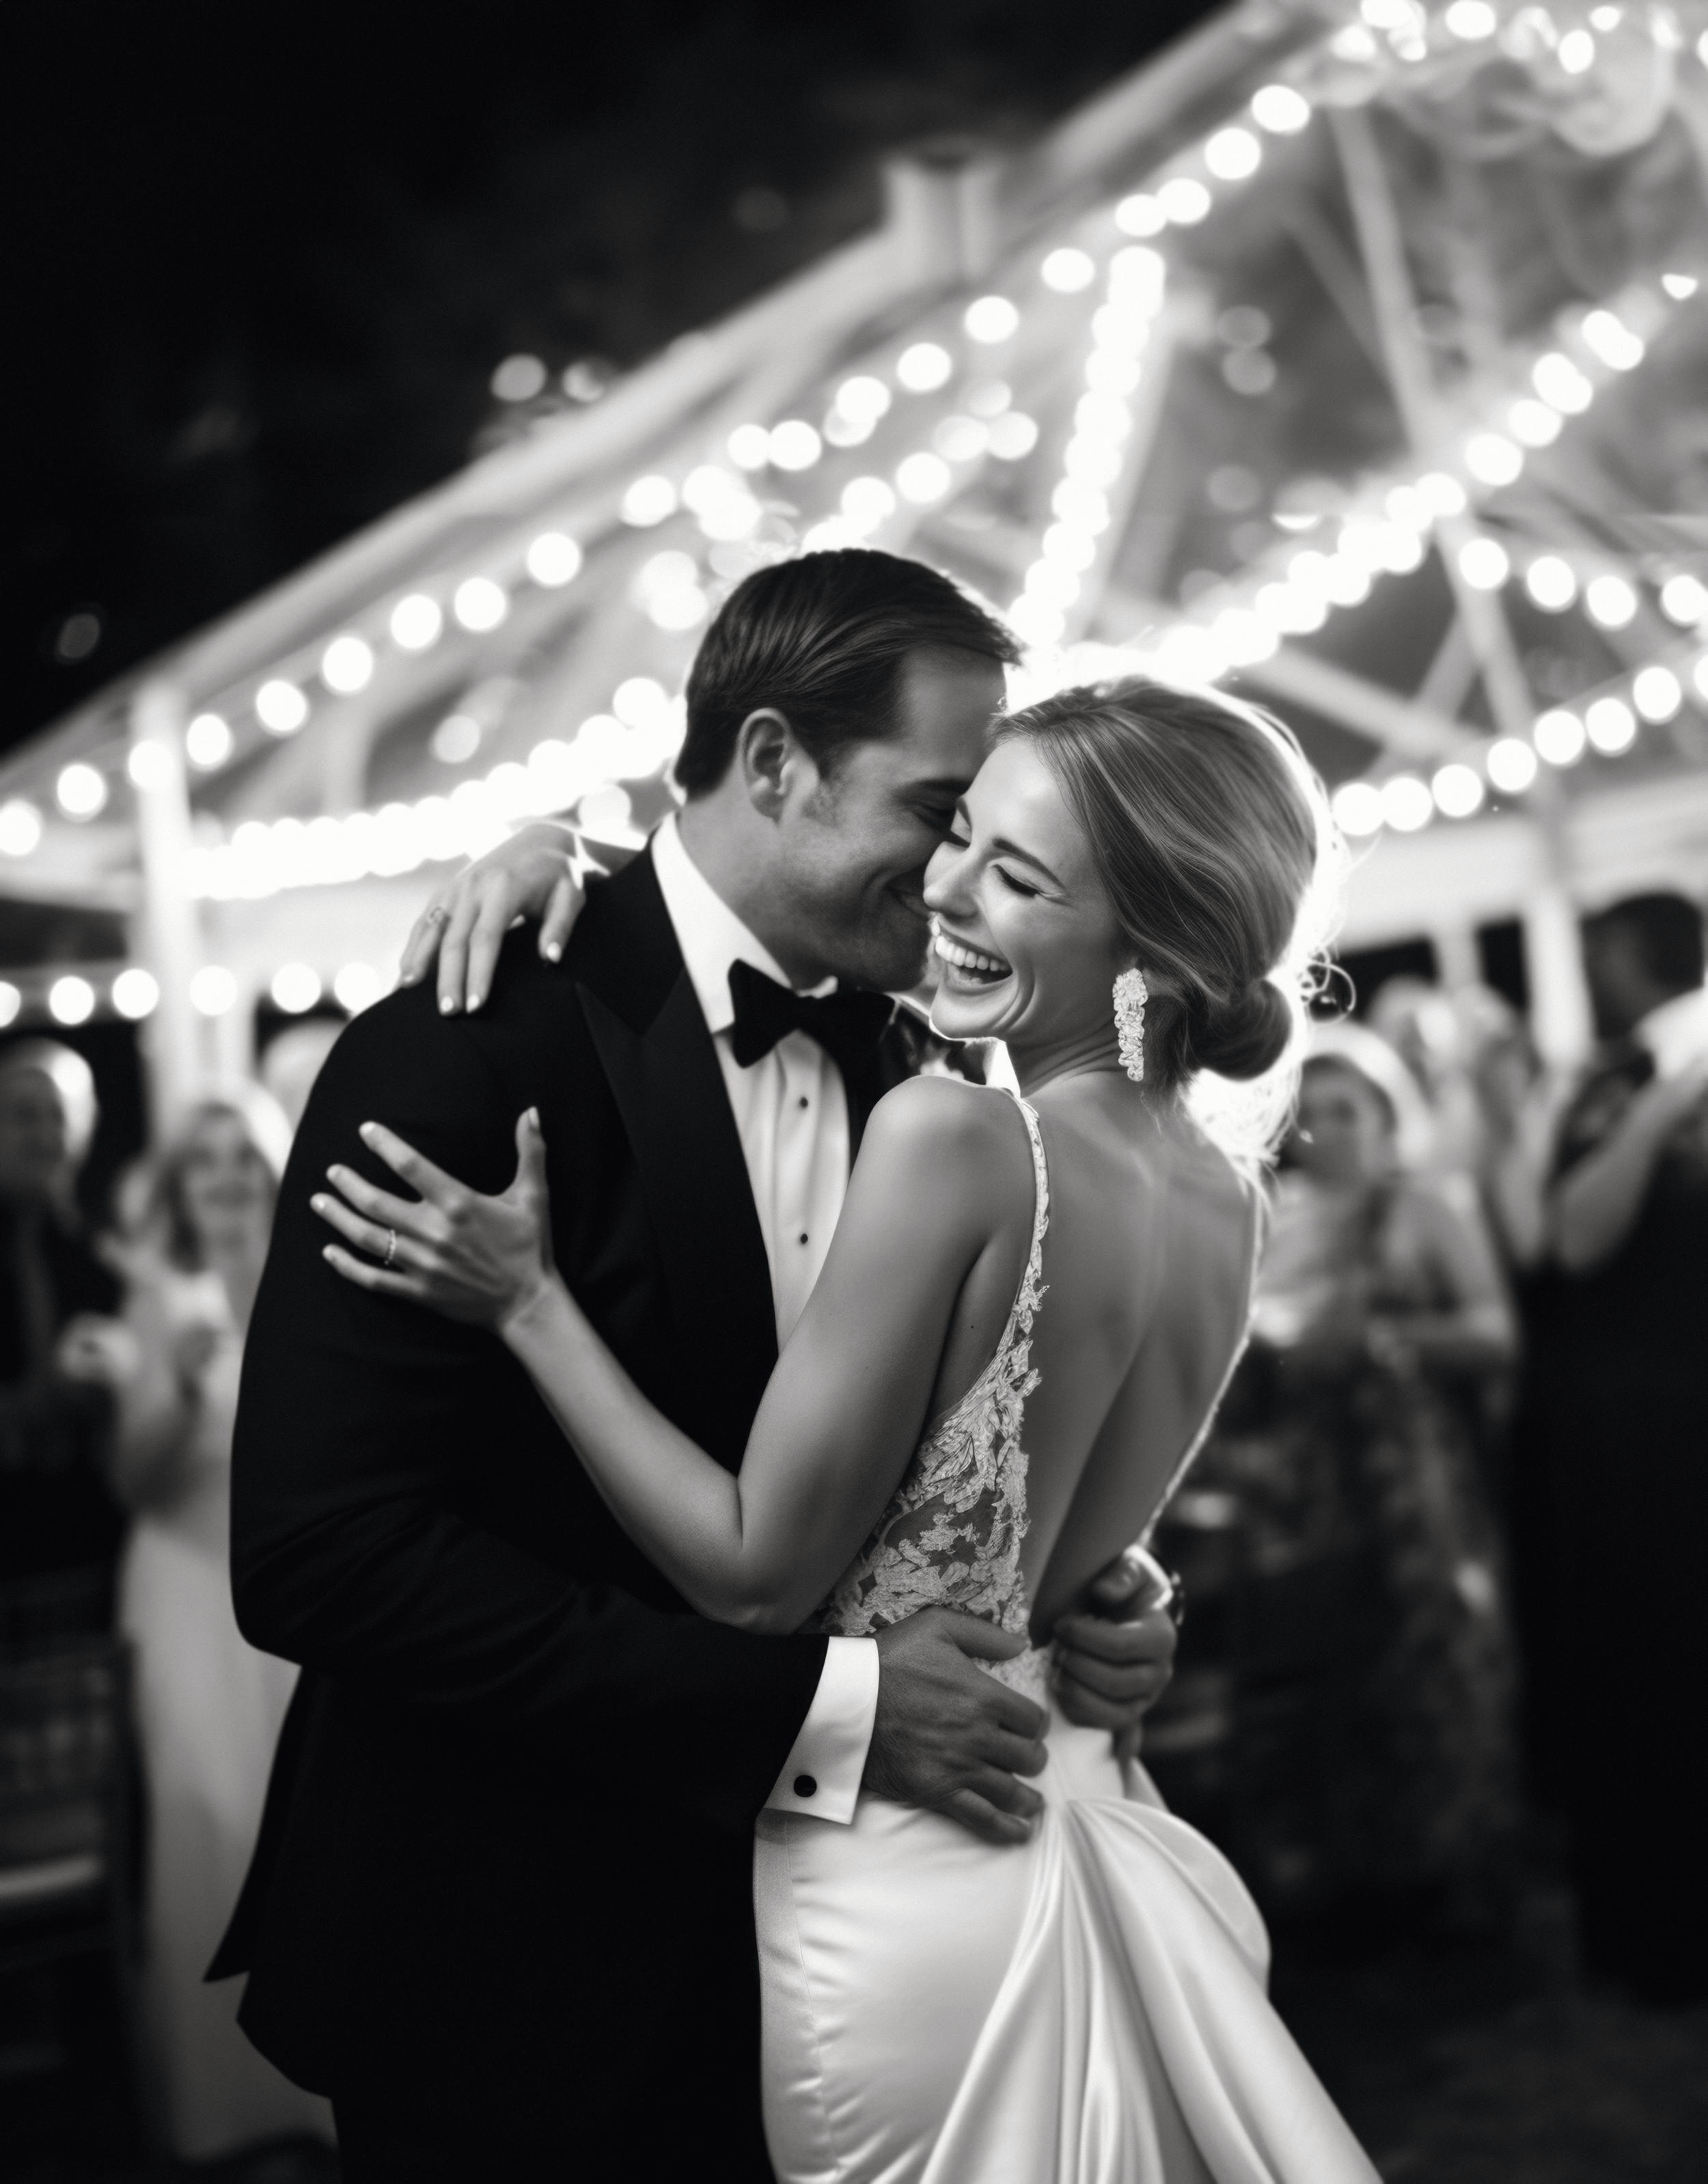 onesatelier_wedding_black_and_white_picture_b2d0dbc1-3573-4304-8e92-663ae993ba2b.png